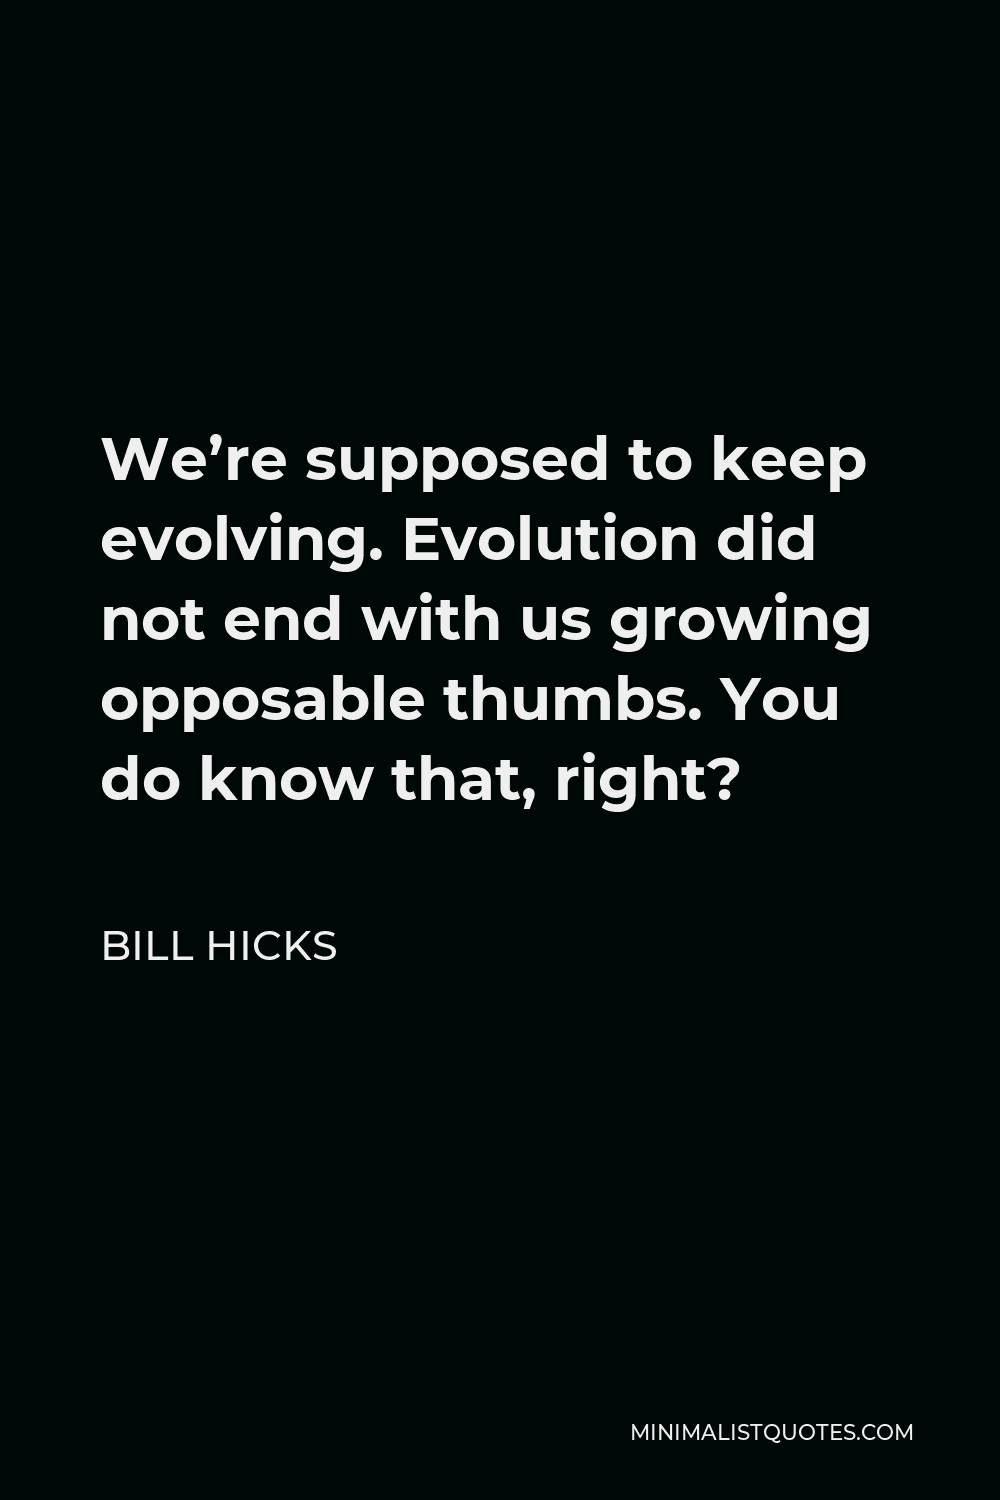 Bill Hicks Quote - We’re supposed to keep evolving. Evolution did not end with us growing opposable thumbs. You do know that, right?